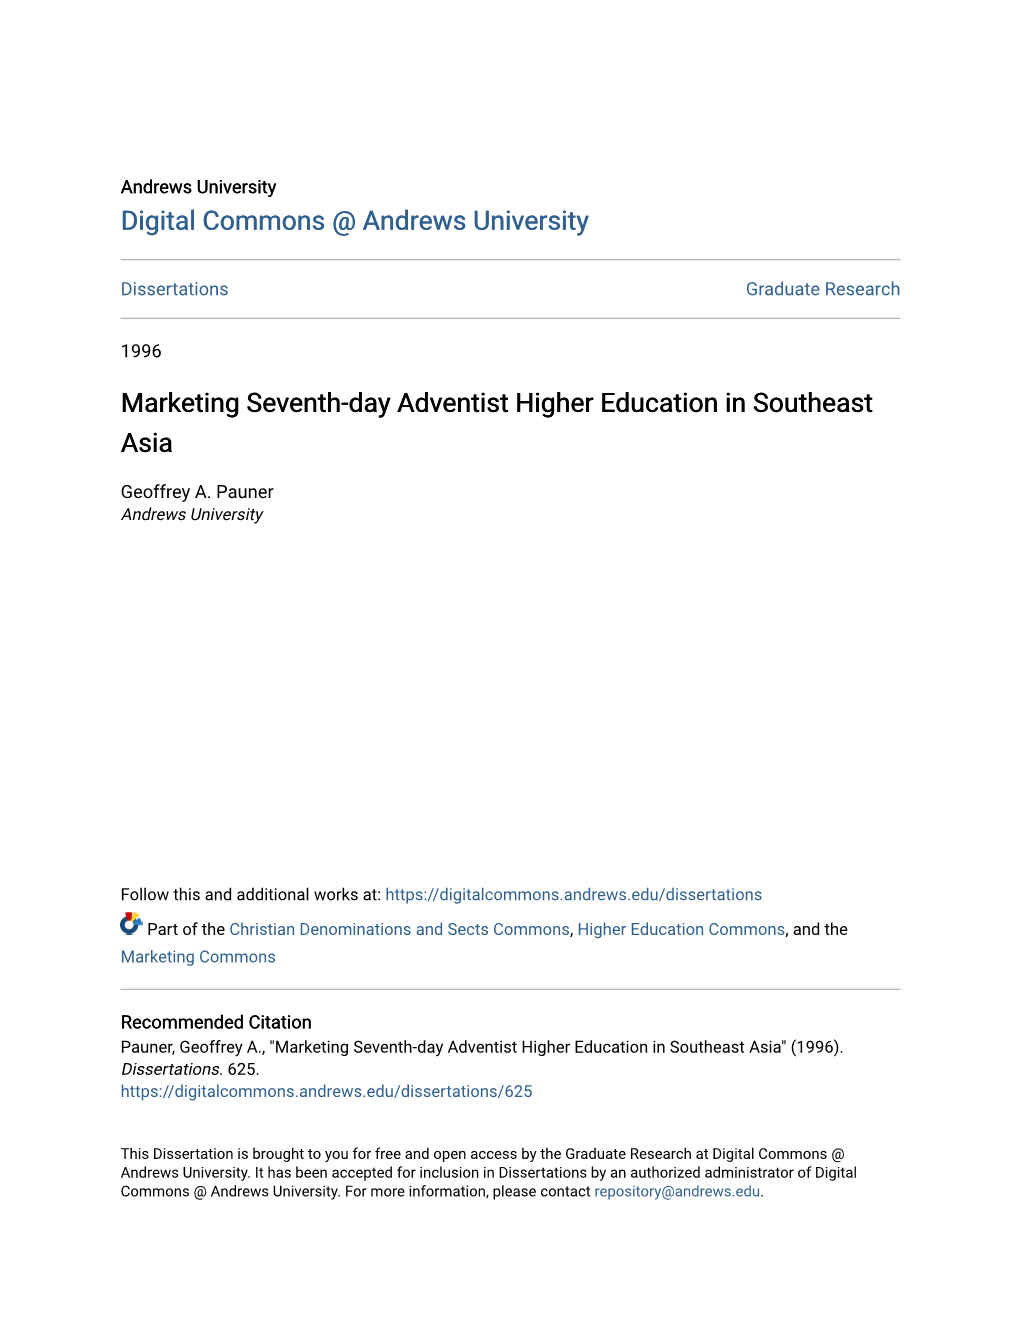 Marketing Seventh-Day Adventist Higher Education in Southeast Asia